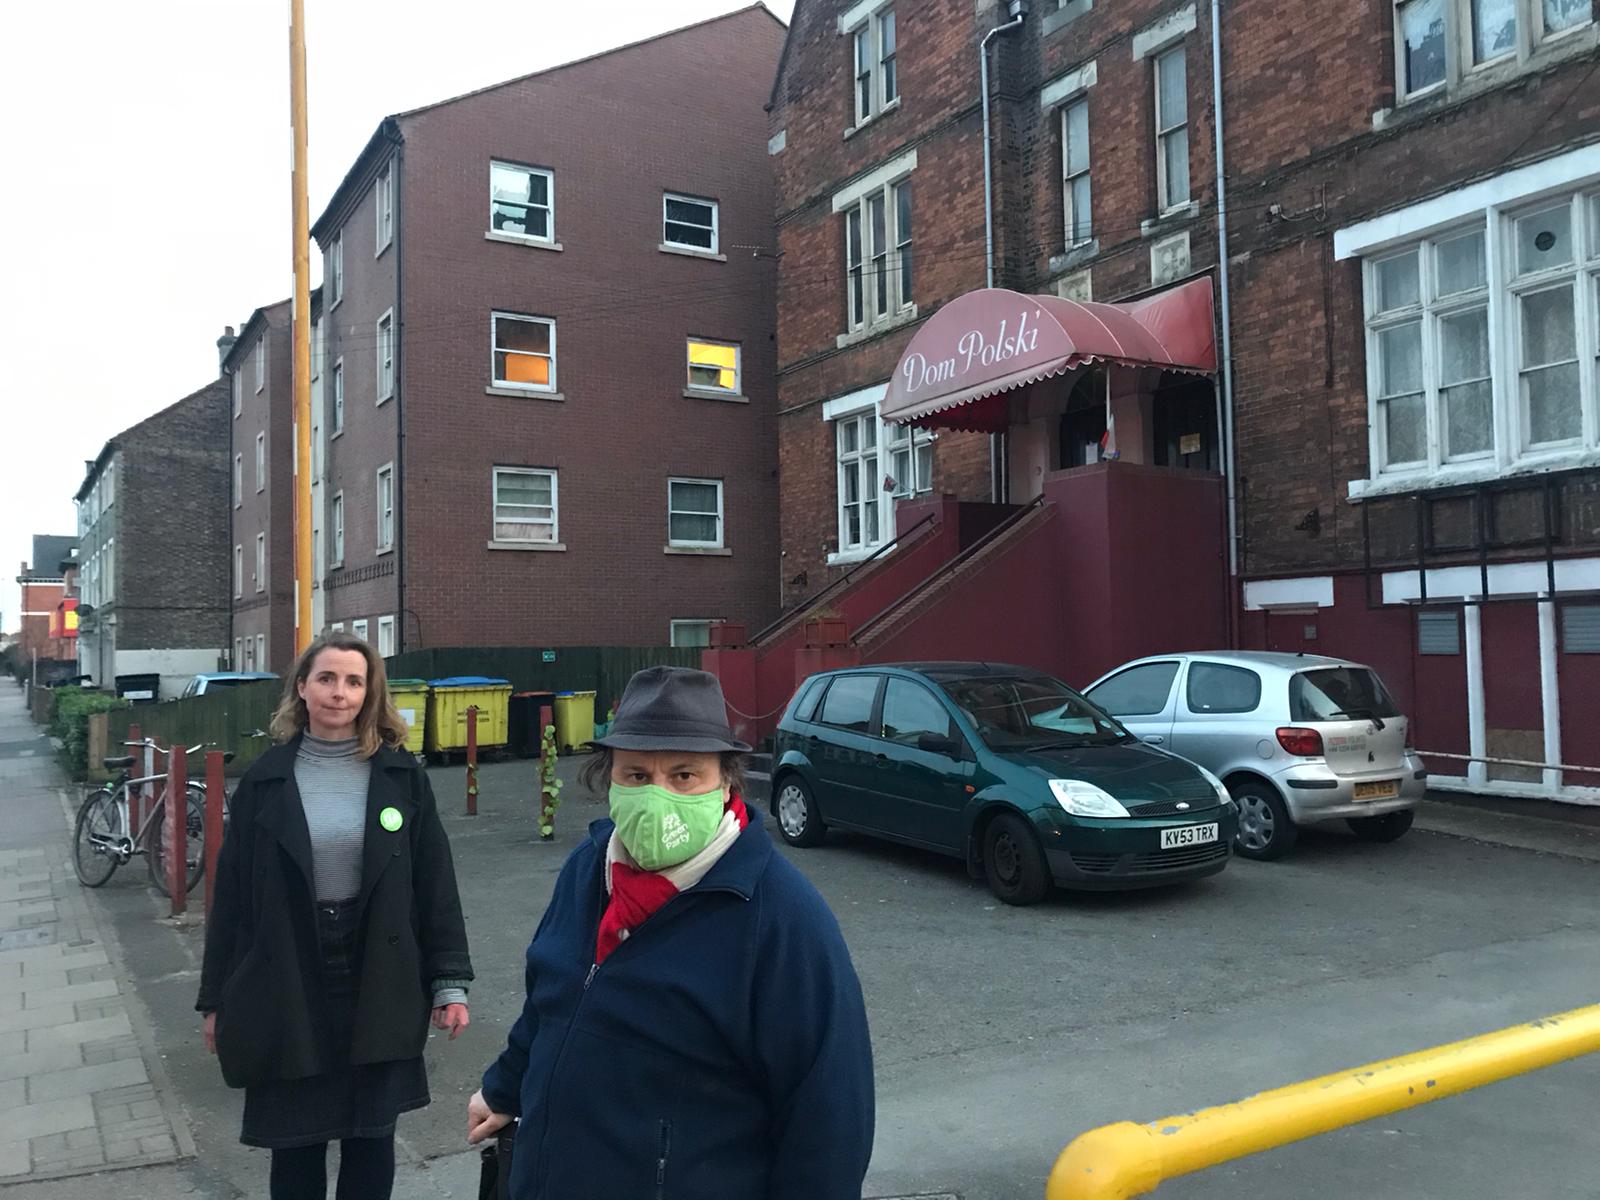 Councillors Lucy and Ben in Ashburnham road